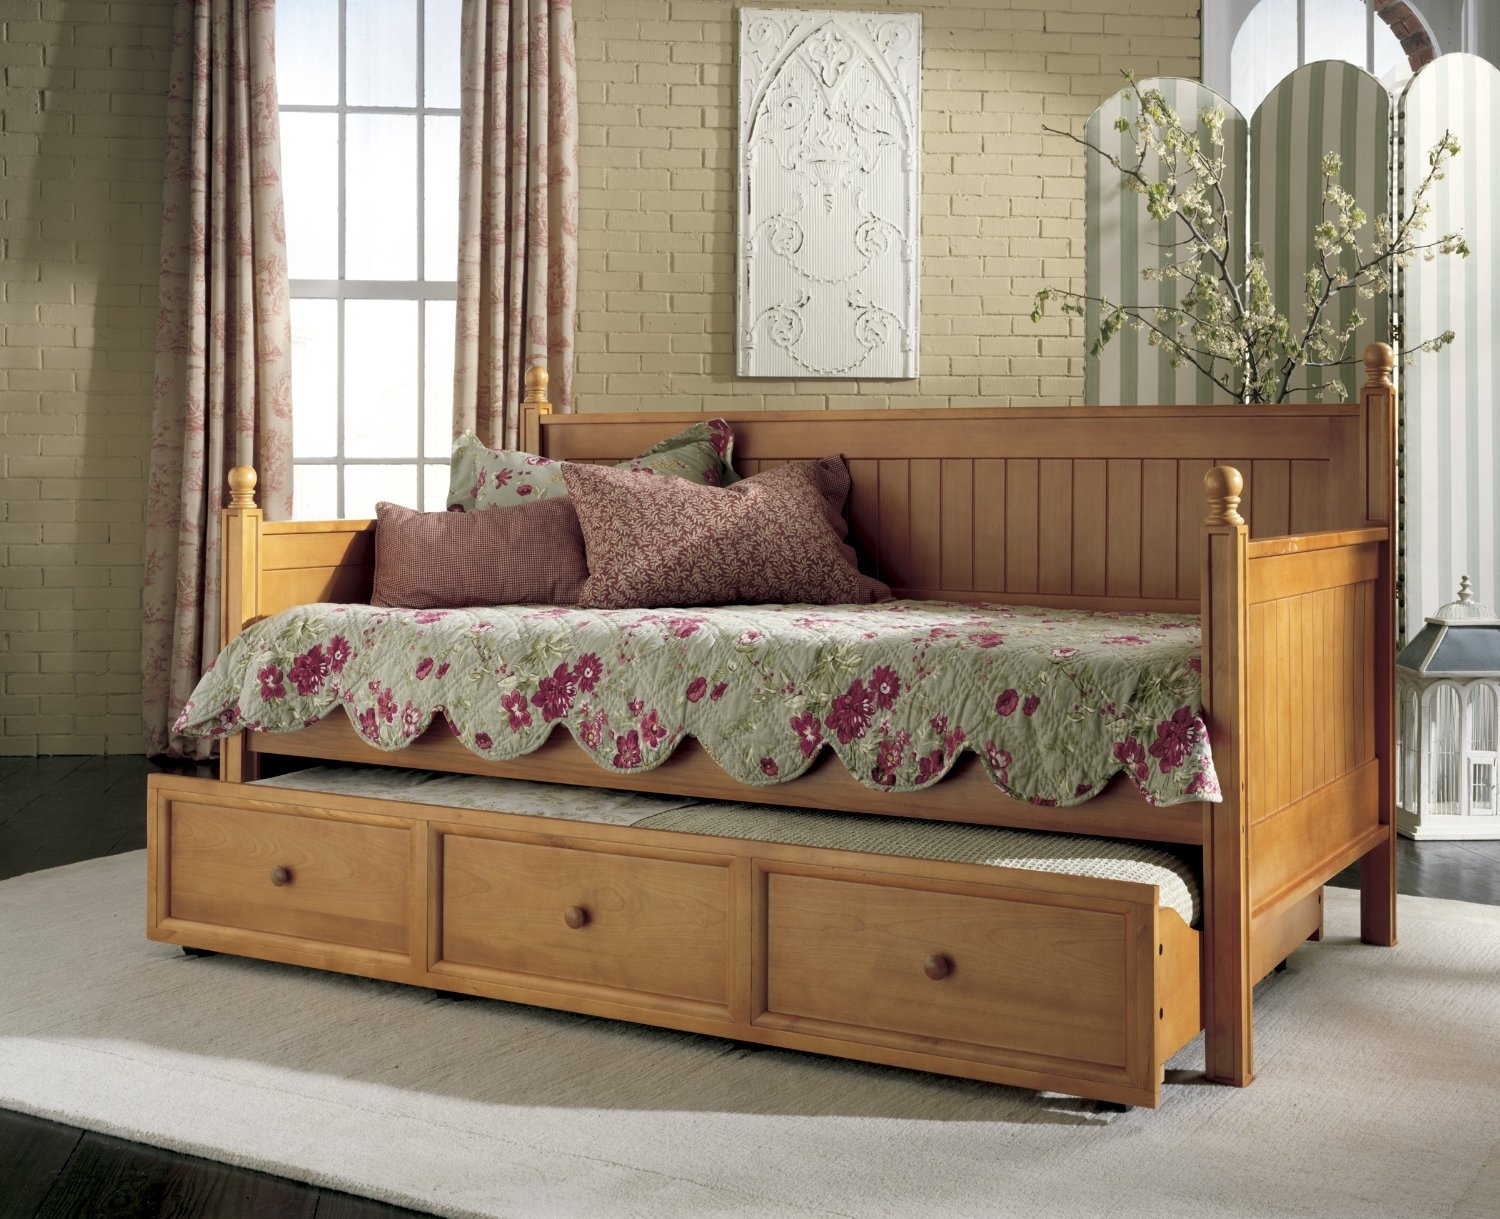 French daybed and trundle